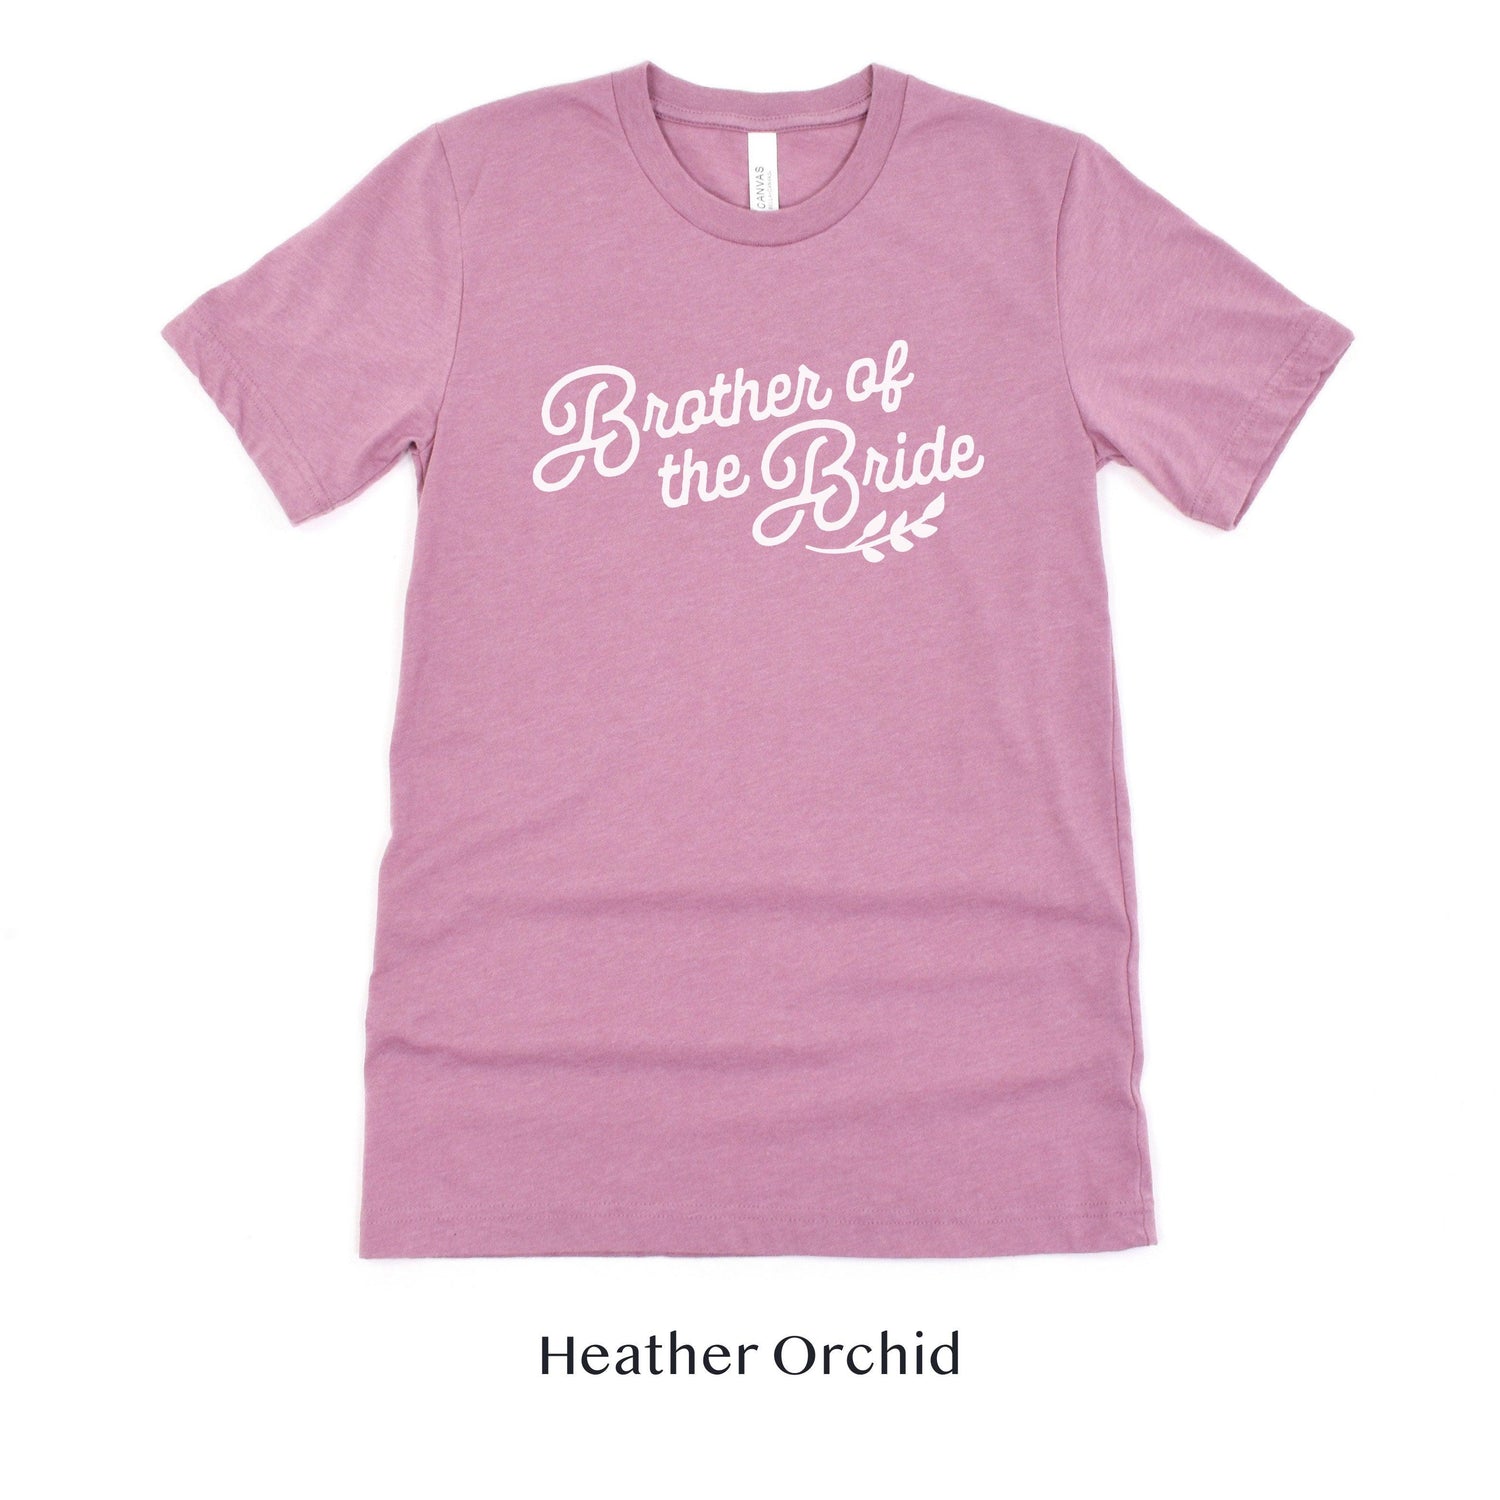 Brother of the Bride Short-sleeve Tee by Oaklynn Lane